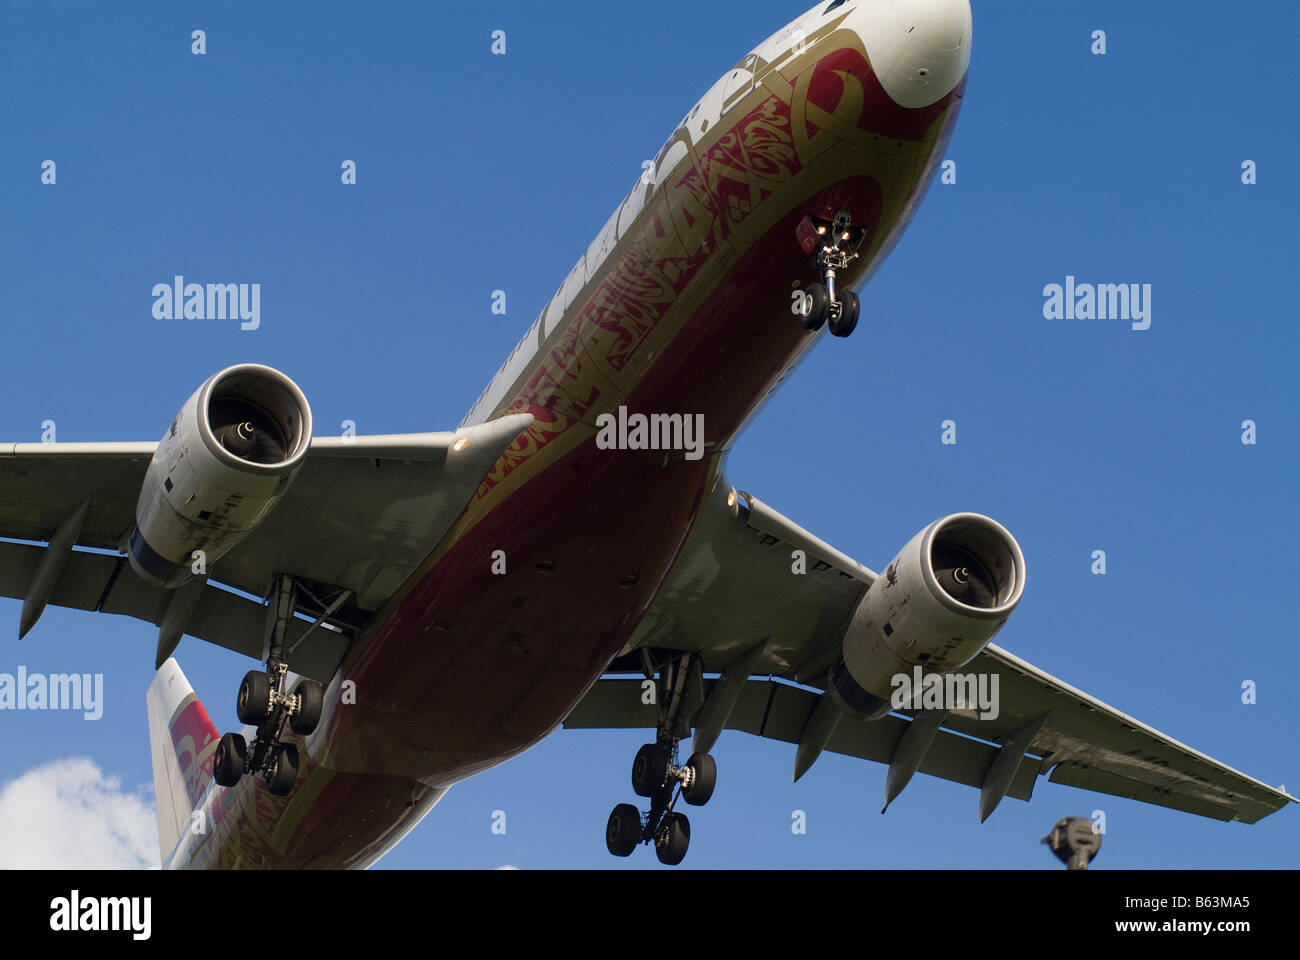 A Jetplane on a final approach to London Heathrow Airport Stock Photo